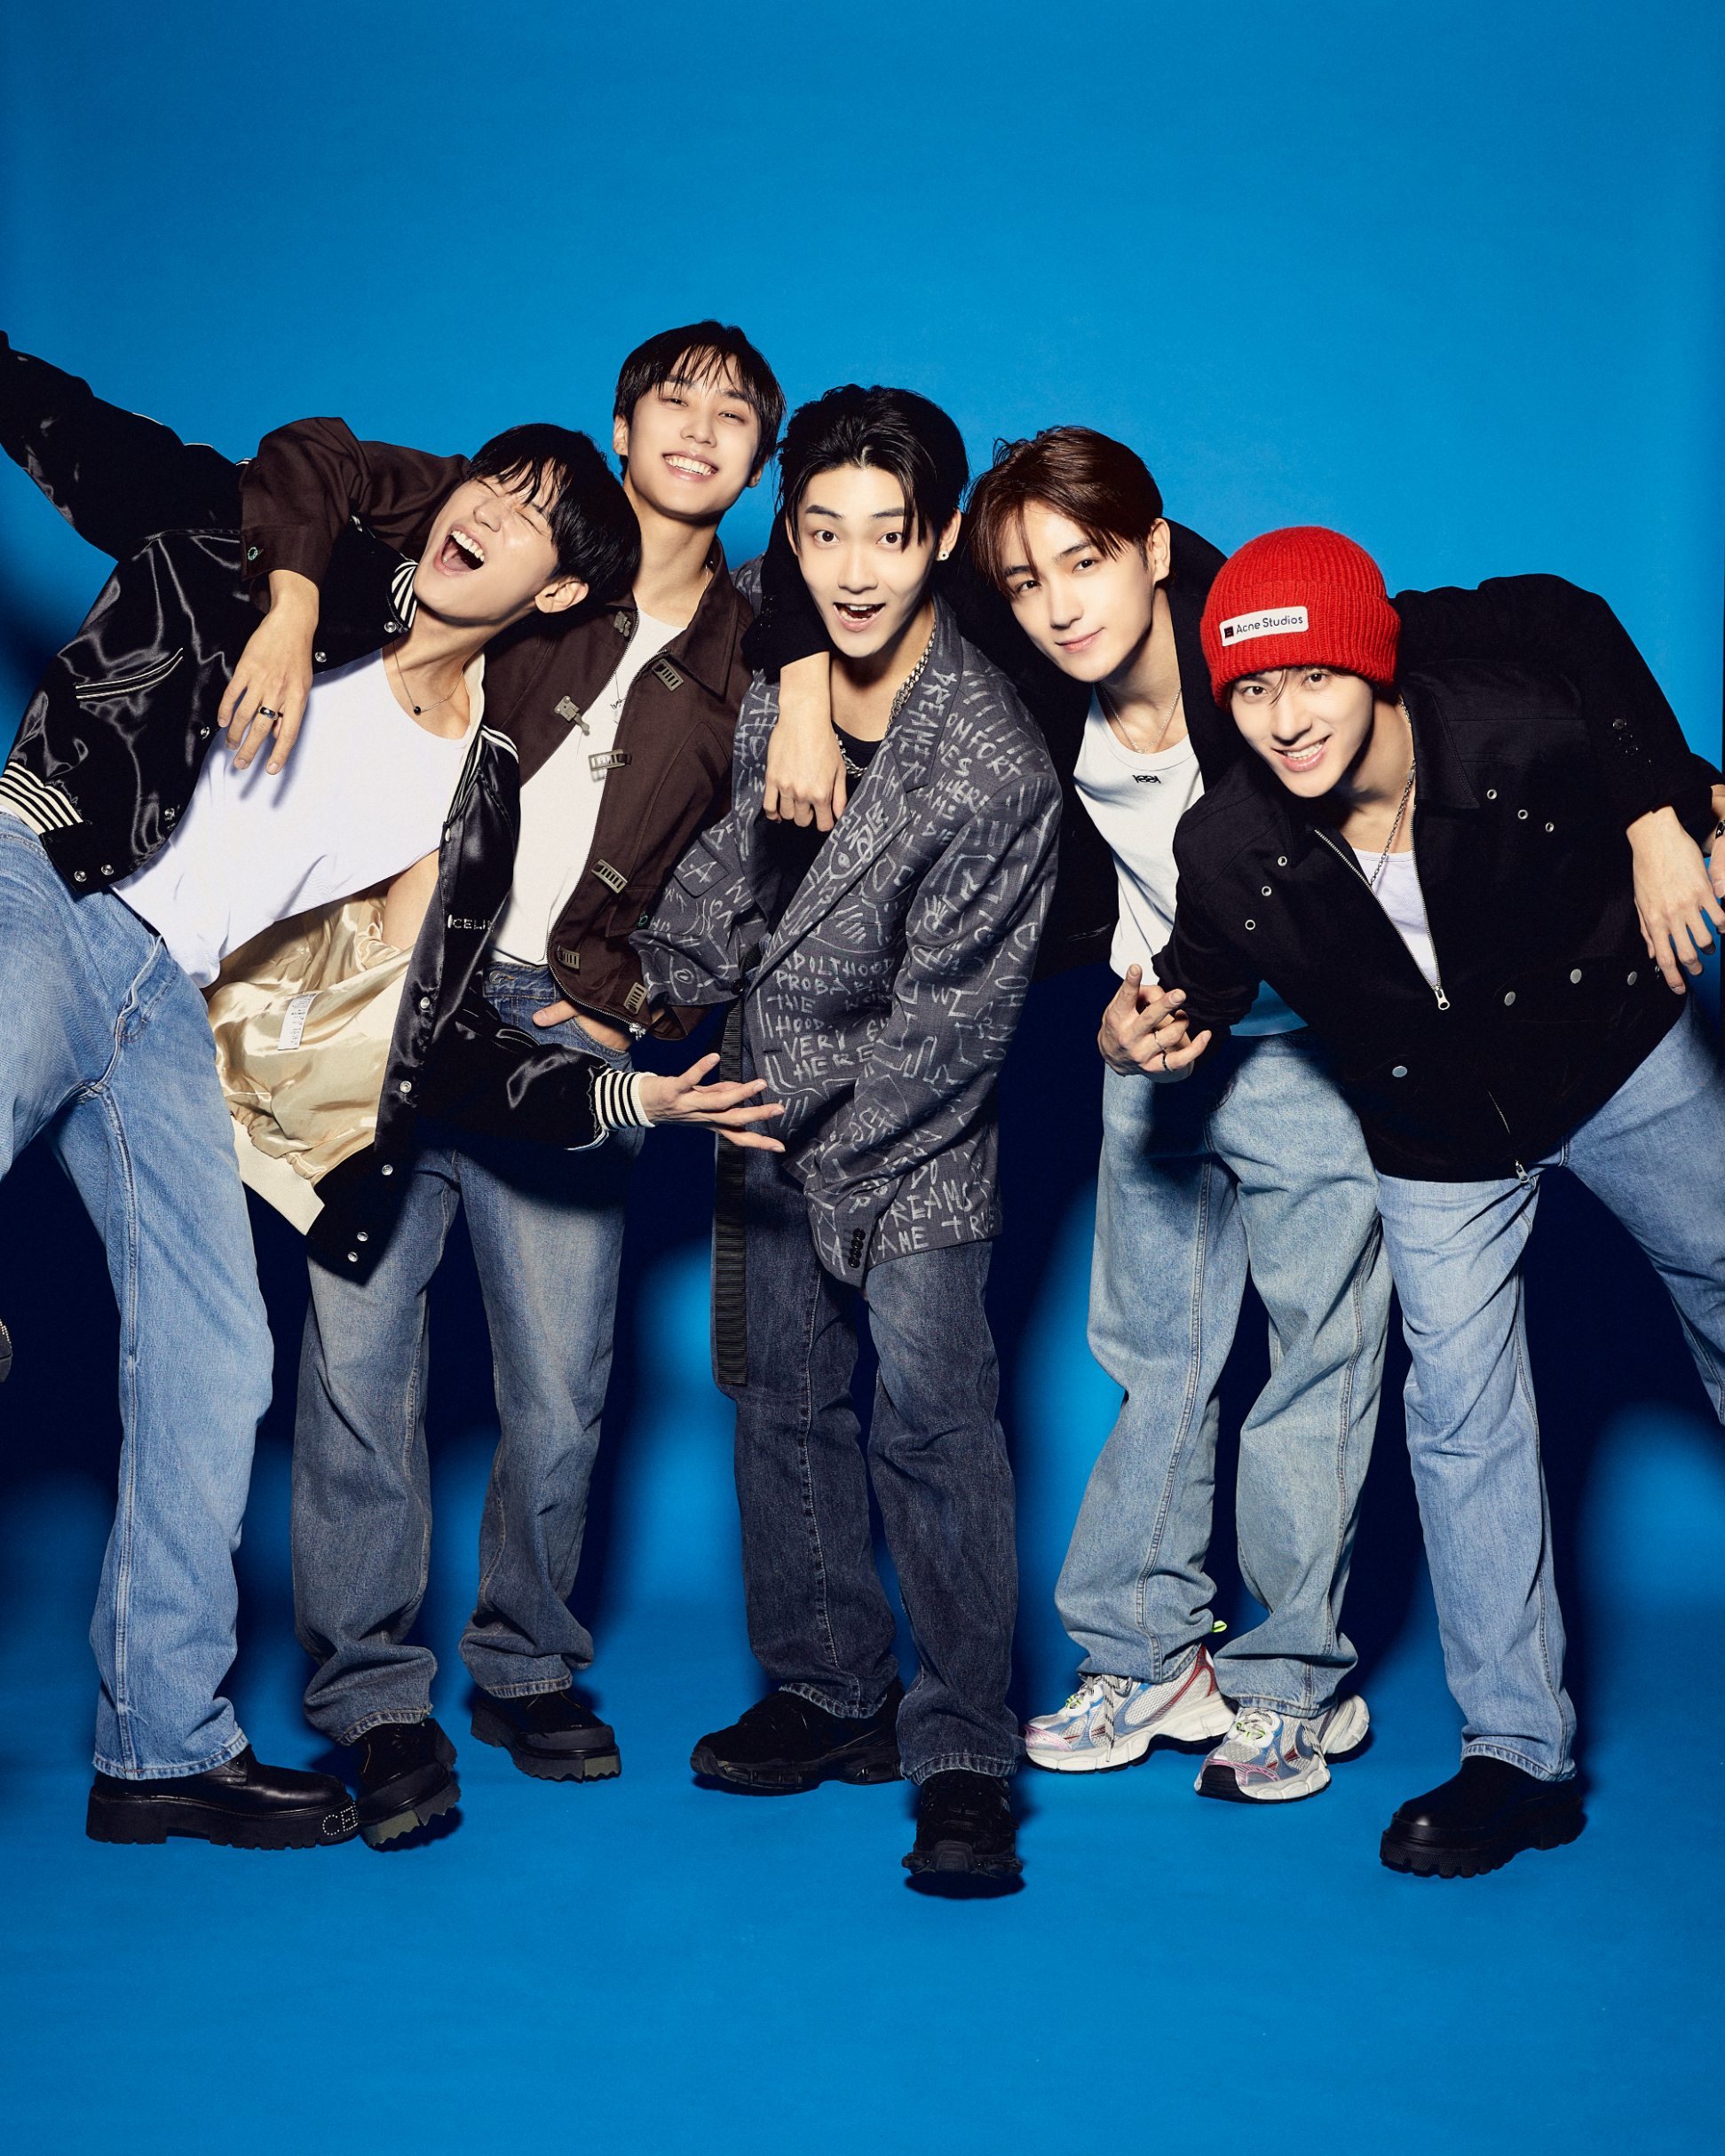 Five members of The Boyz posing playfully, dressed in casual and stylish outfits against a plain backdrop